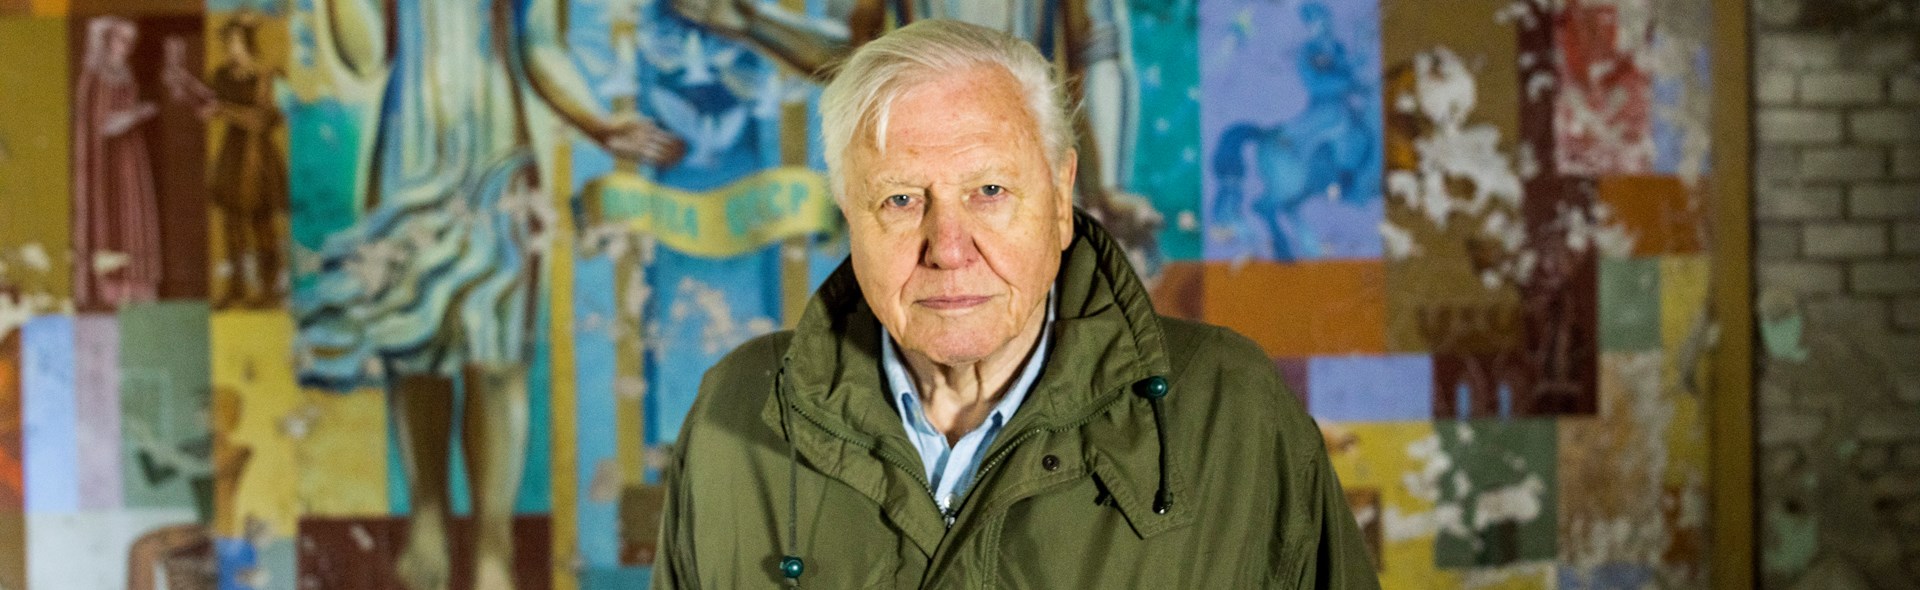 David Attenborough: A Life on Our Planet - Live From the World Premiere